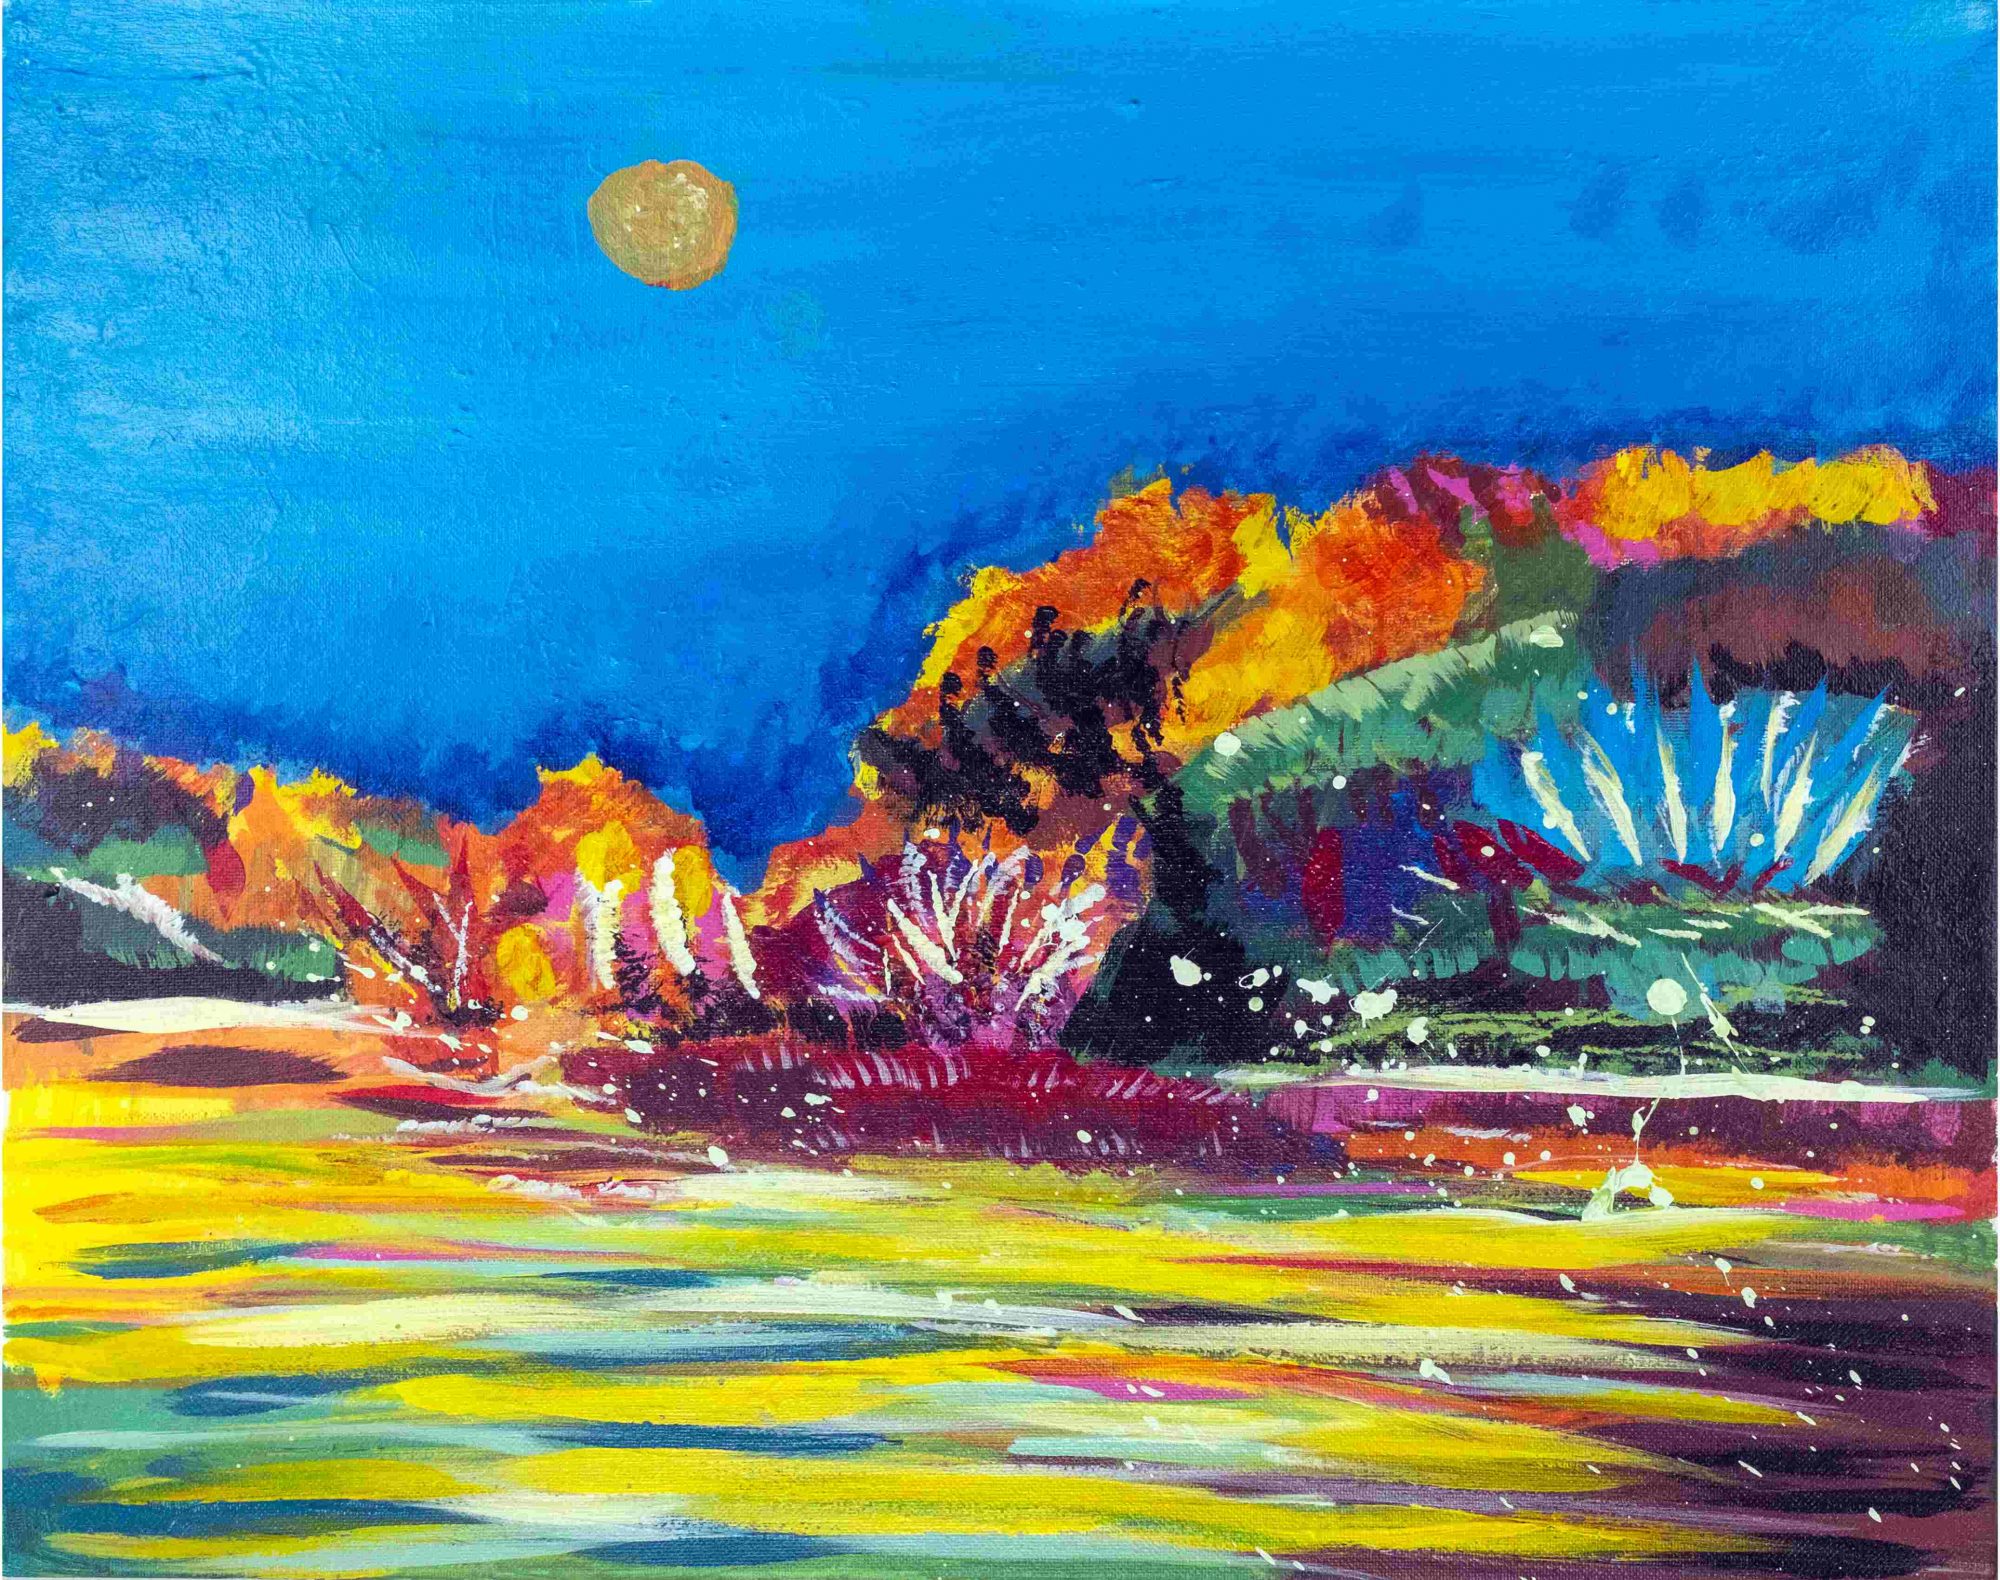 This painting is done by Phavizan from SAAAC. This is a vivid and expressive painting featuring a landscape at night. The sky is a deep blue, transitioning to black at the top, with a textured golden moon hanging low. Below, the horizon is ablaze with fiery colors—reds, oranges, and yellows—suggestive of trees or bushes in an autumnal or perhaps even ablaze state. In the foreground, there's a body of water reflecting these vibrant colors, with streaks of yellow, white, pink, and a hint of green, indicating ripples or currents on the water's surface. The brushwork is loose and dynamic, adding a sense of movement and wildness to the scene.